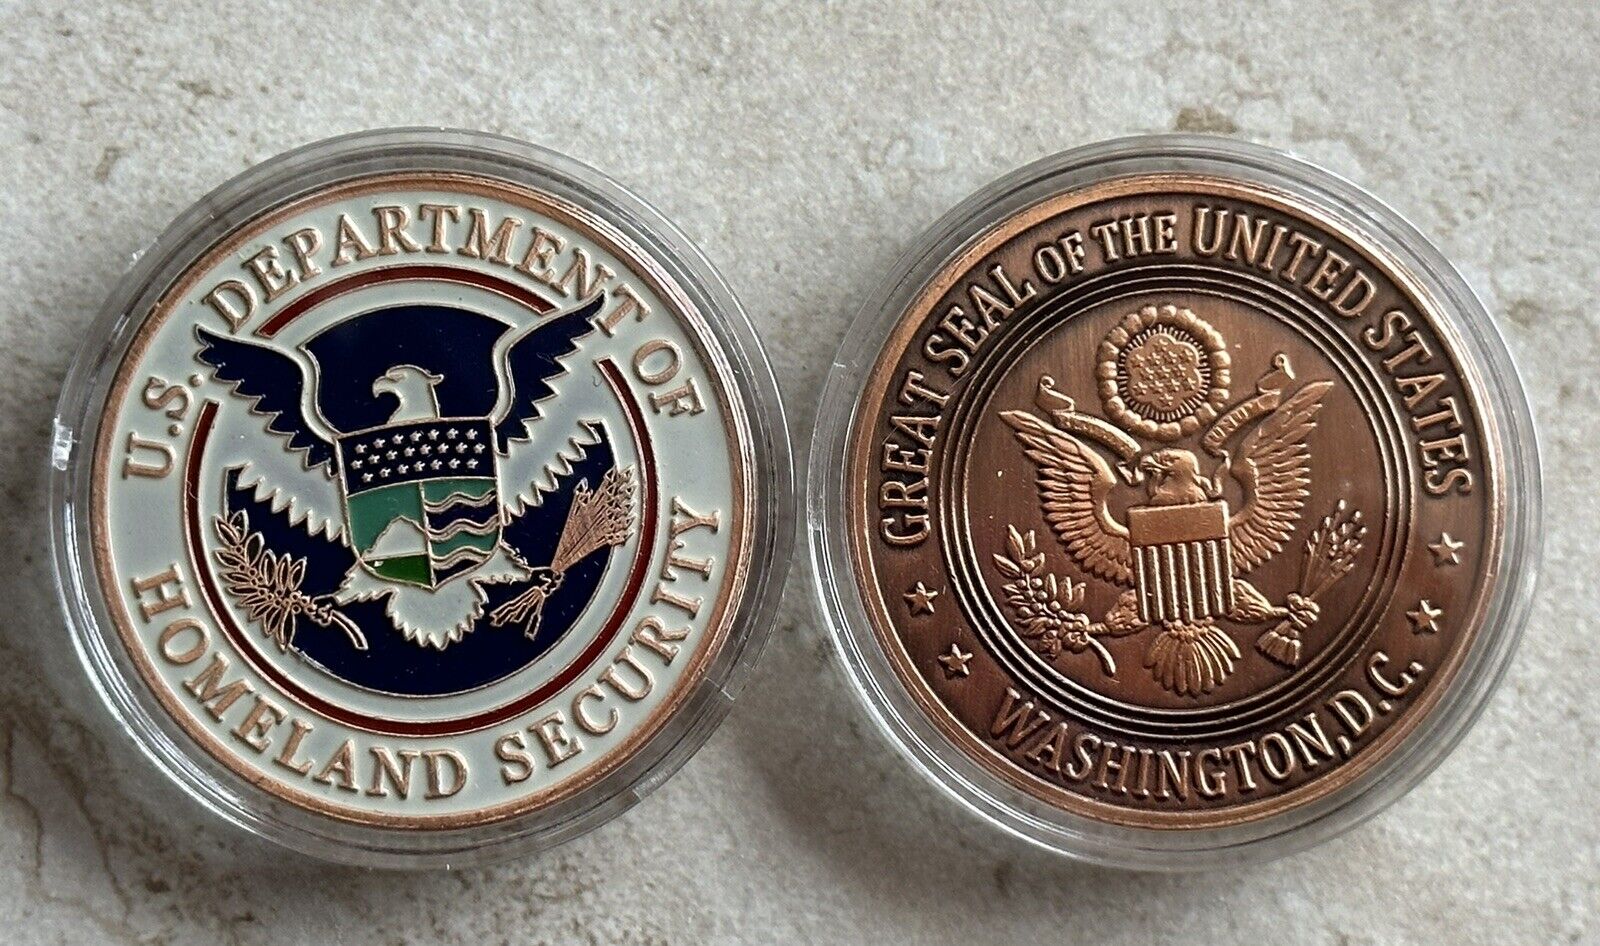 Home land Security Coin